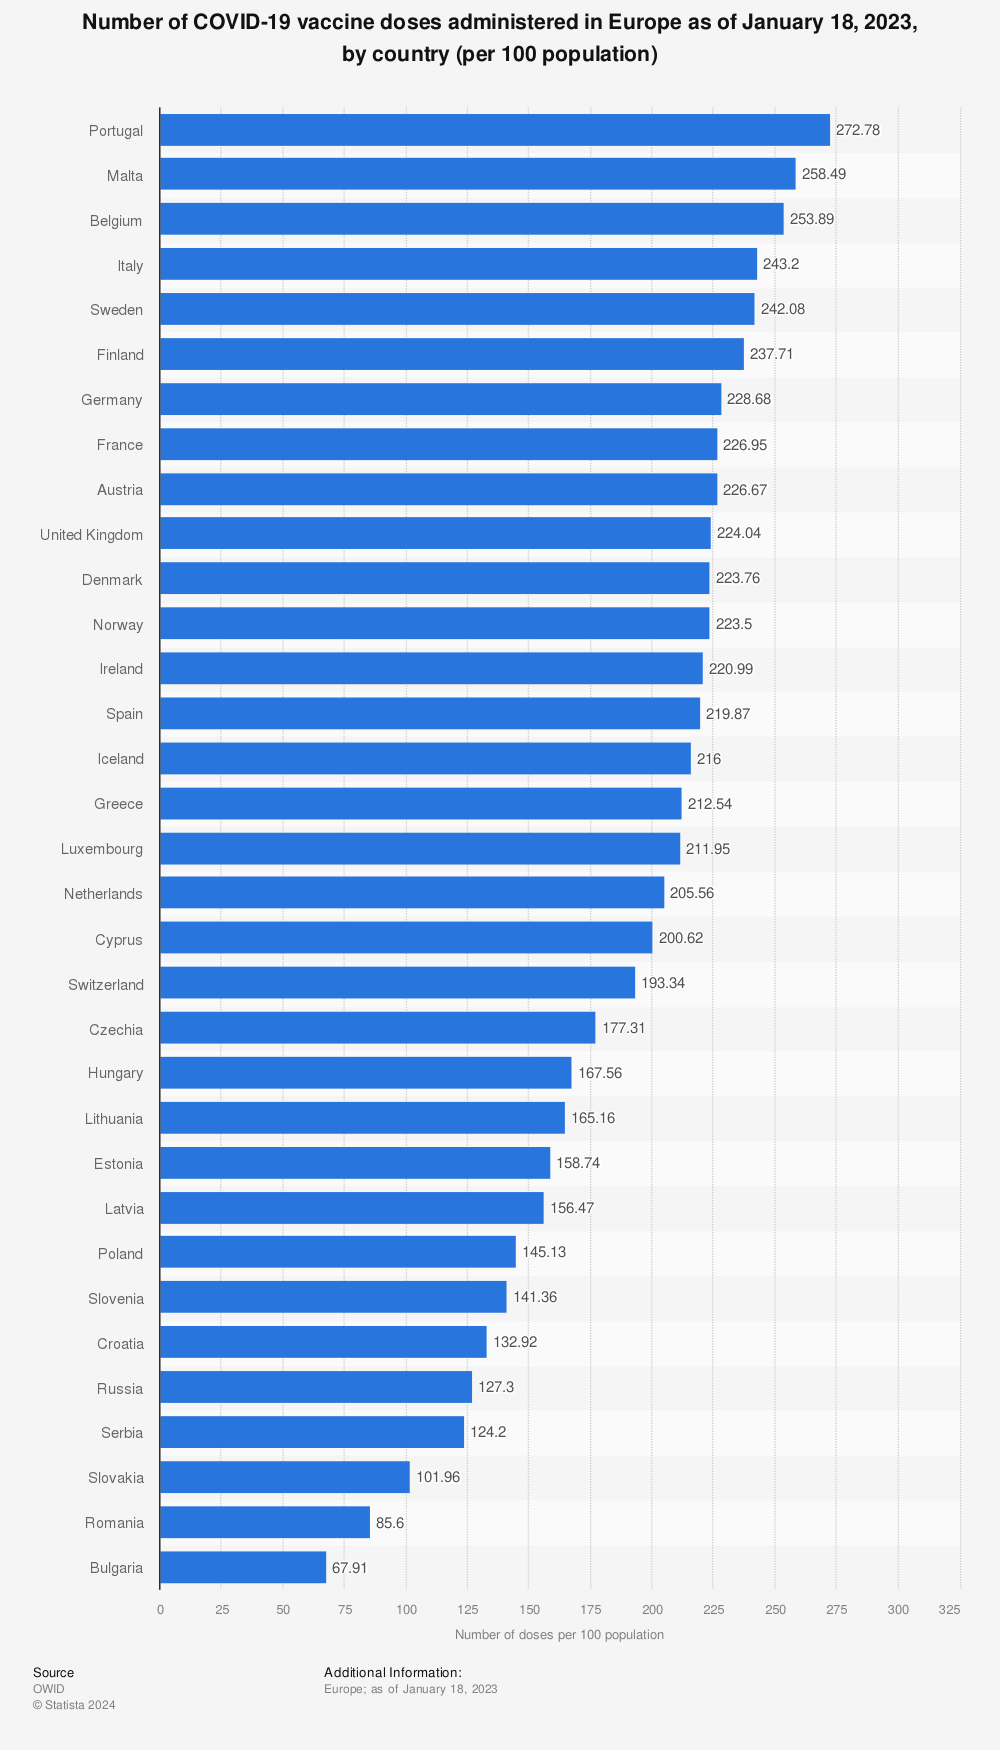 Statistic: Number of COVID-19 vaccination doses administered in Europe as of March 21, 2021, by country (per 100 population) | Statista